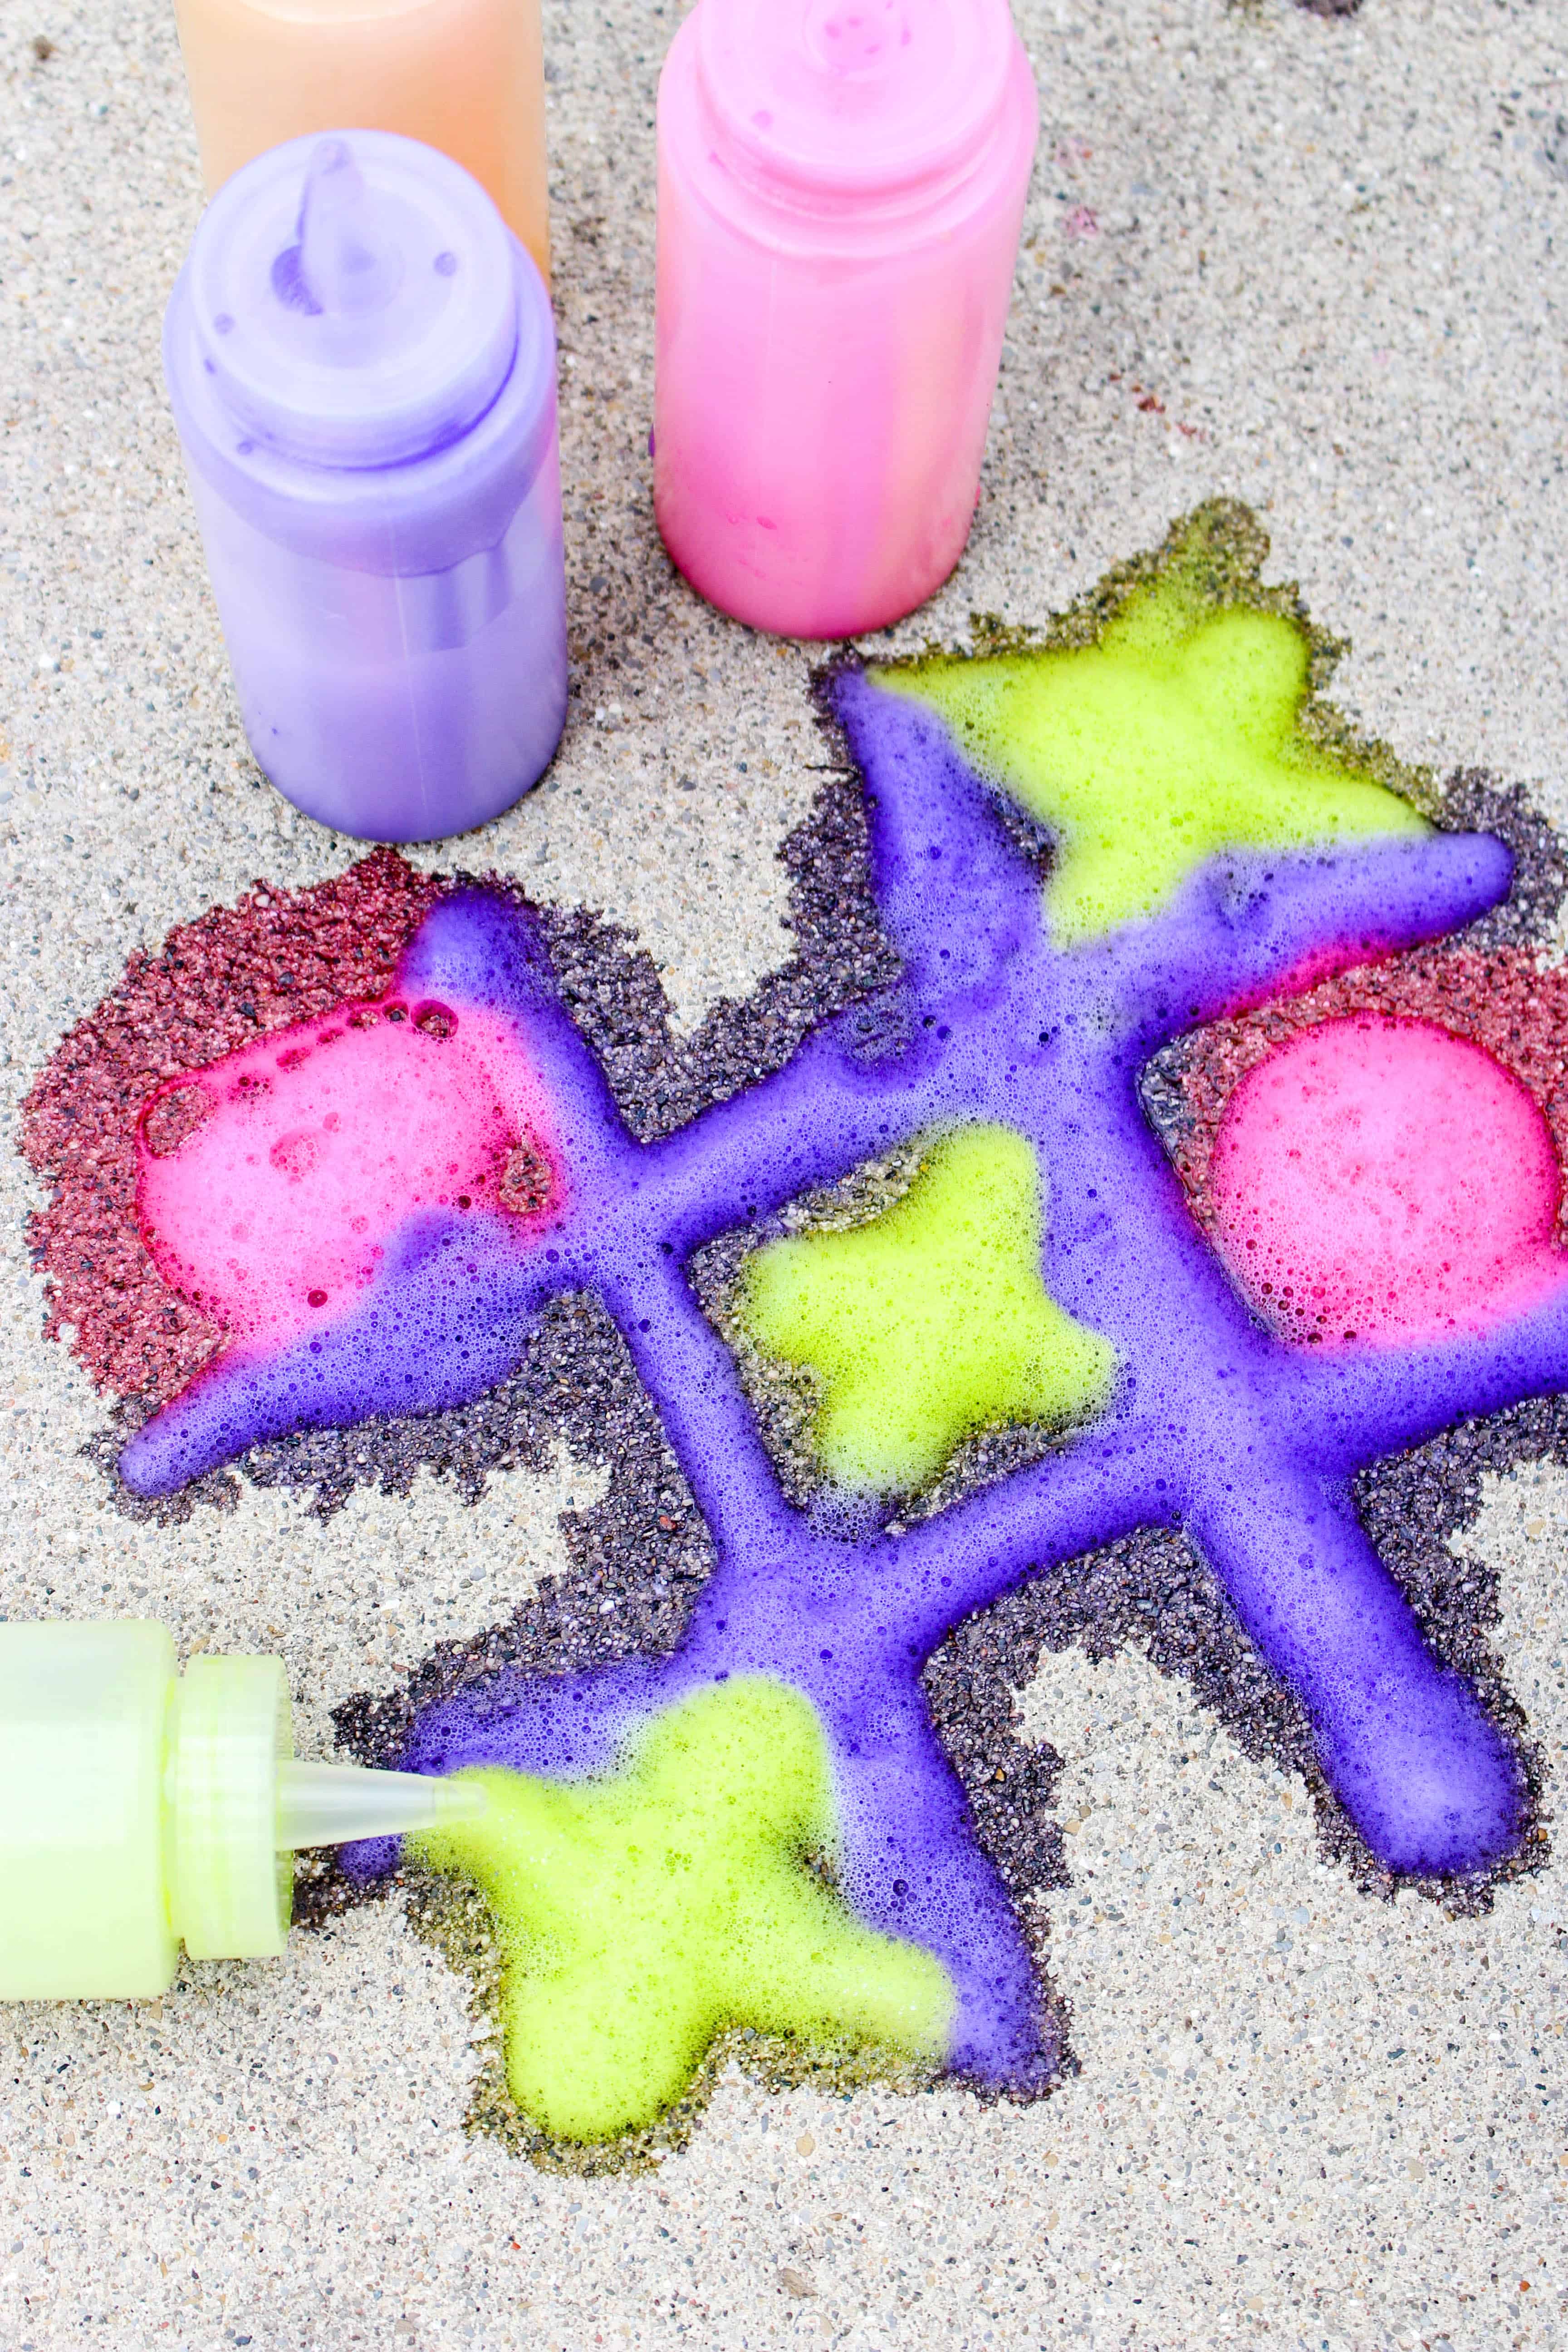  This soap foam sidewalk paint puts a spin on soap foam sensory play. Check out how to use it on the sidewalk for some fun games and outdoor art.